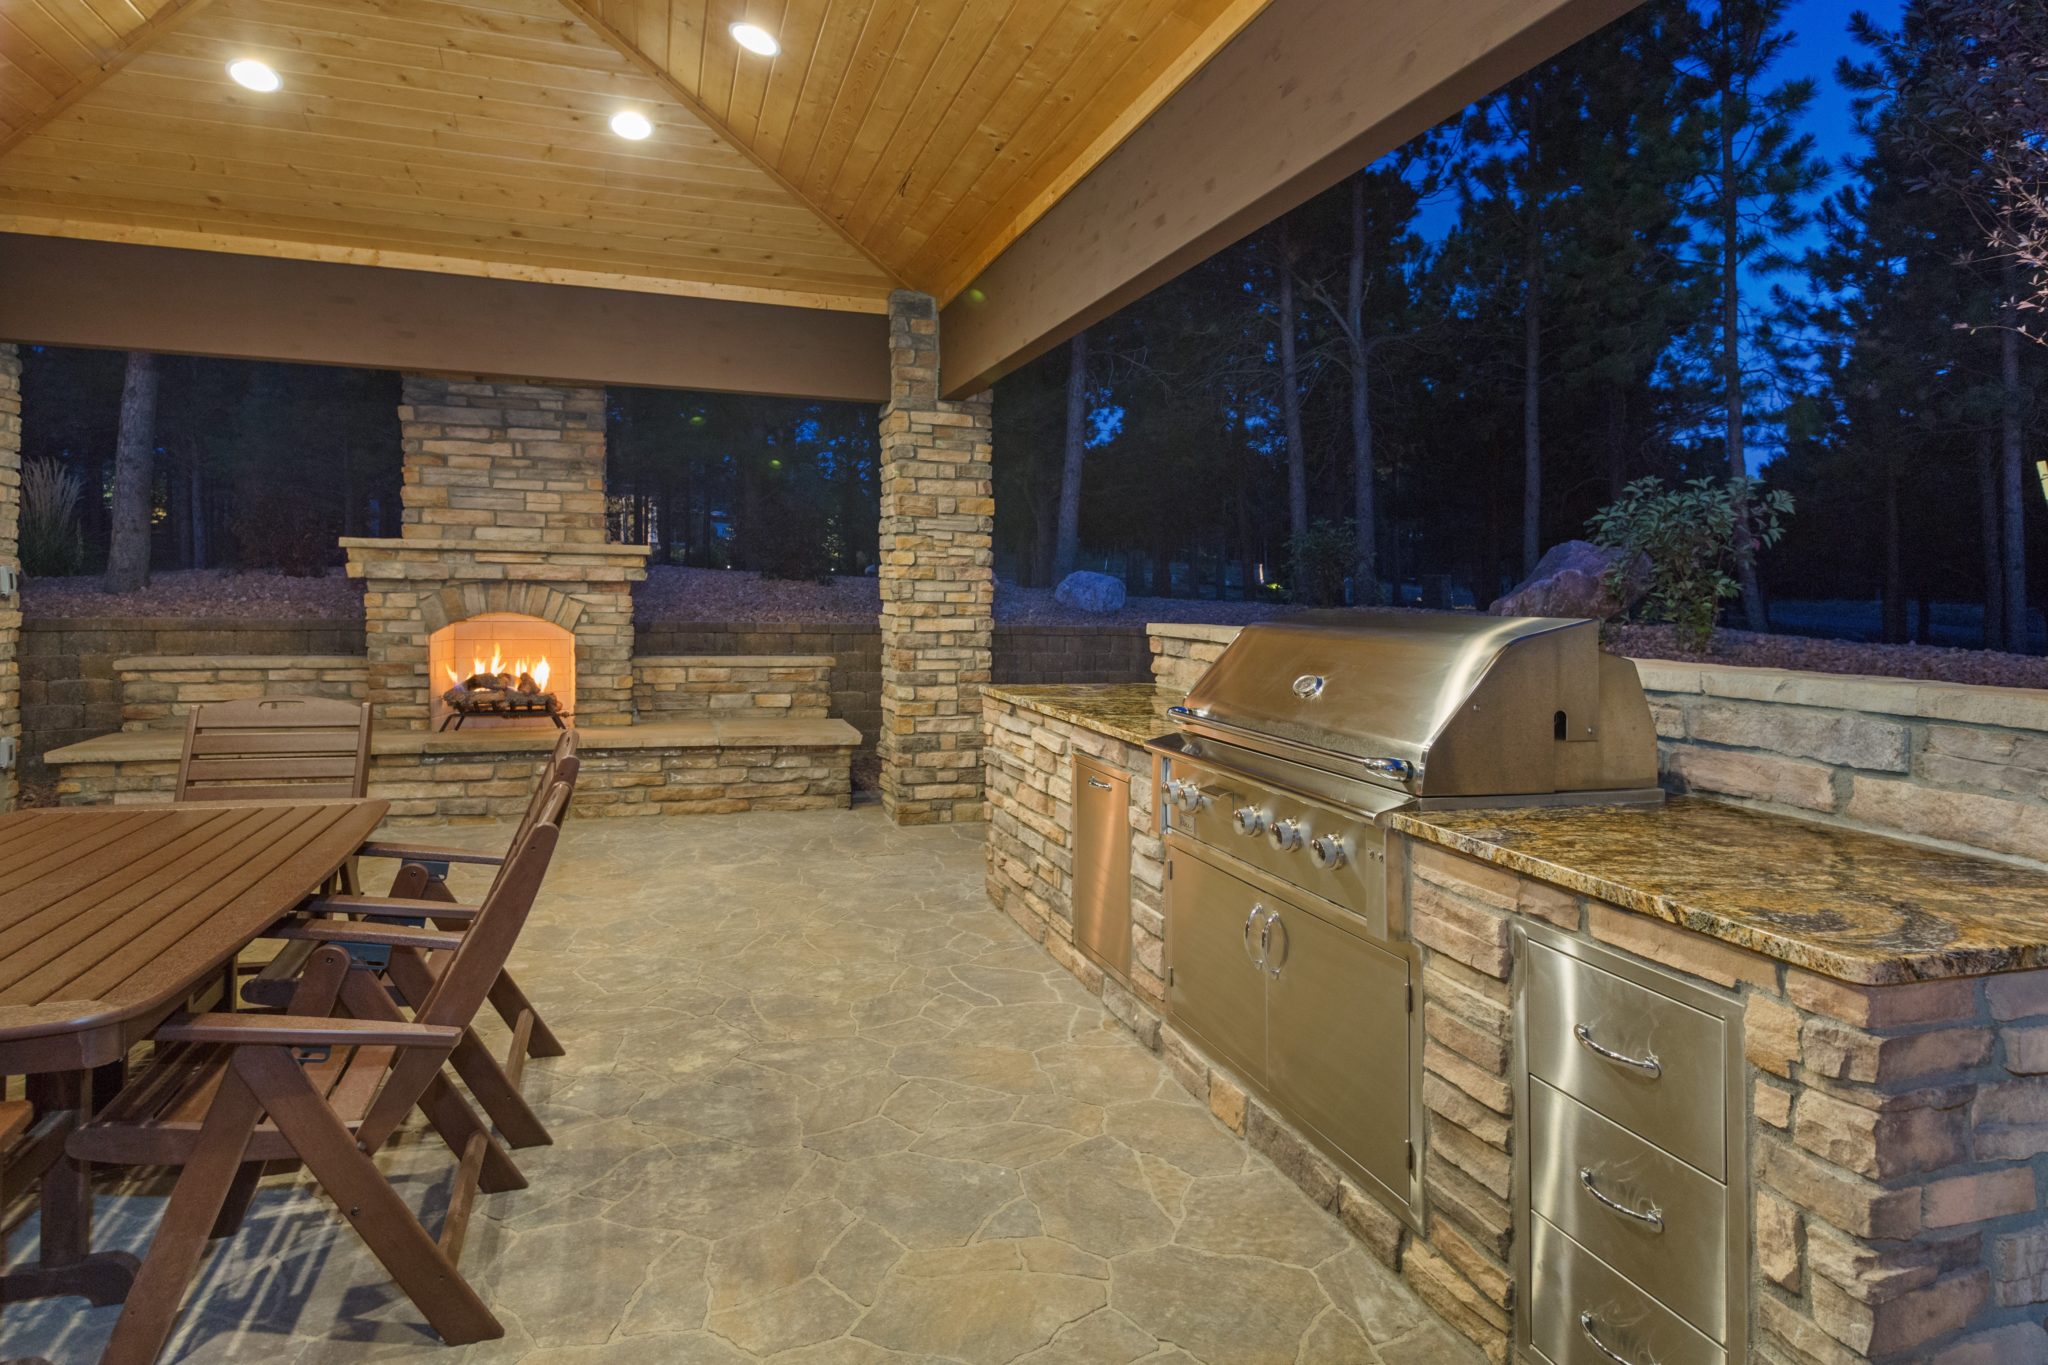 Outdoor living space with stone fireplace, retaining wall, outdoor kitchen and custom paver patio